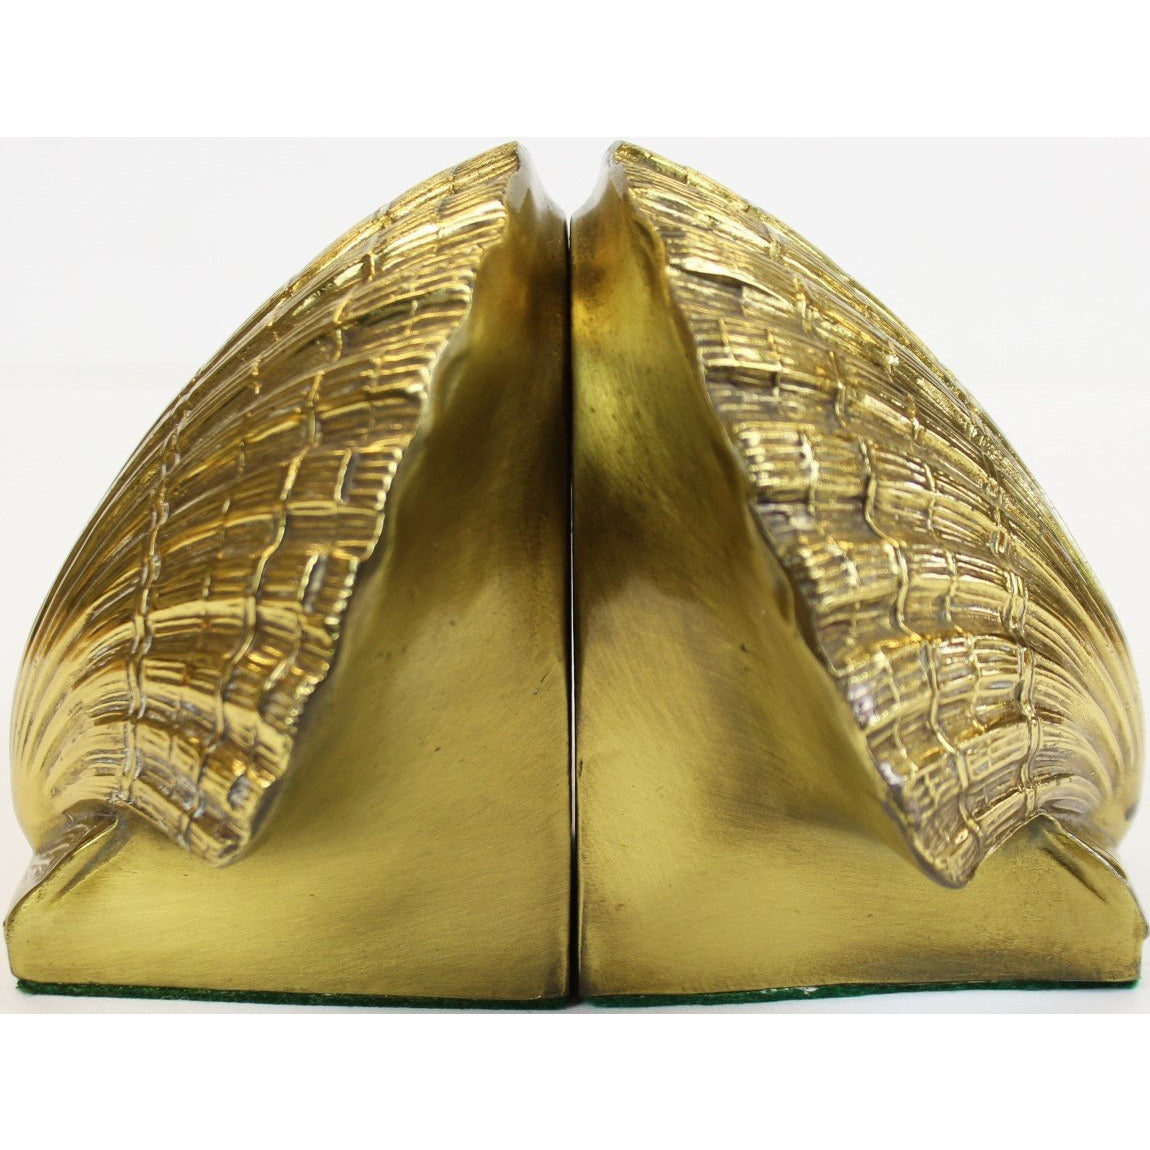 Vintage Brass Shell Bookends with Patina Gold Metal